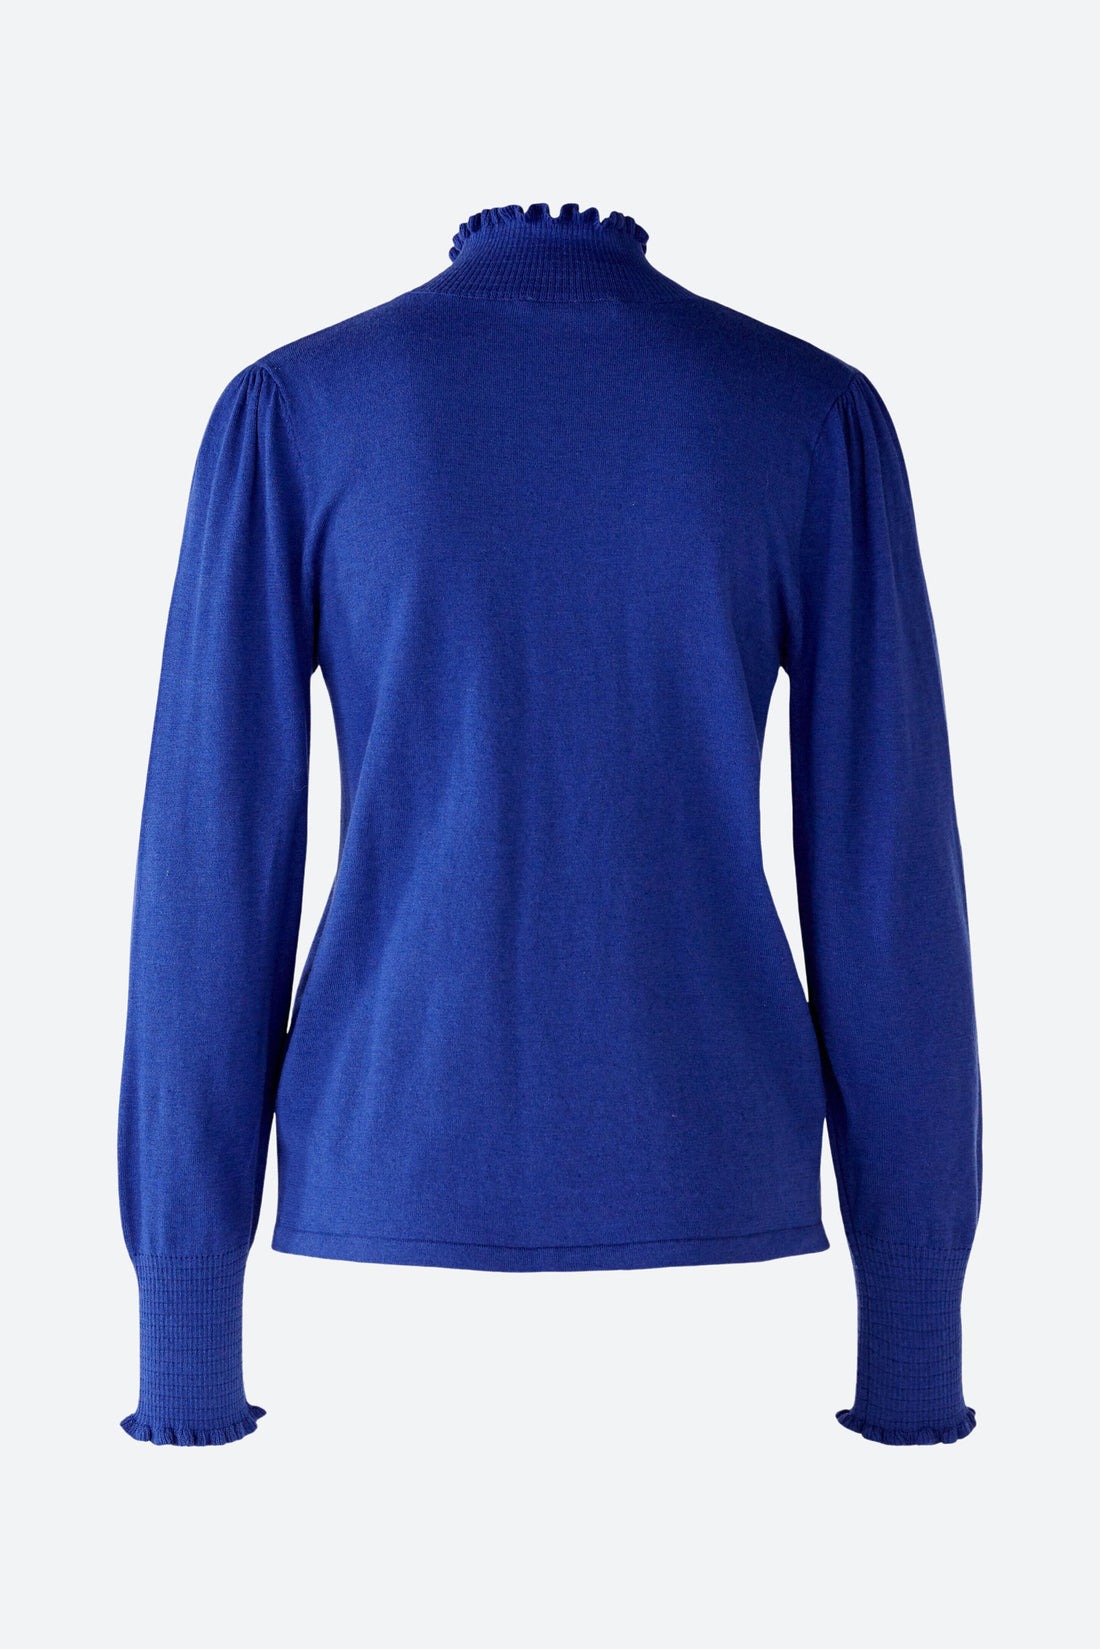 Jumper In Cotton Blend With Silk And Cashmere_79498_5410_02